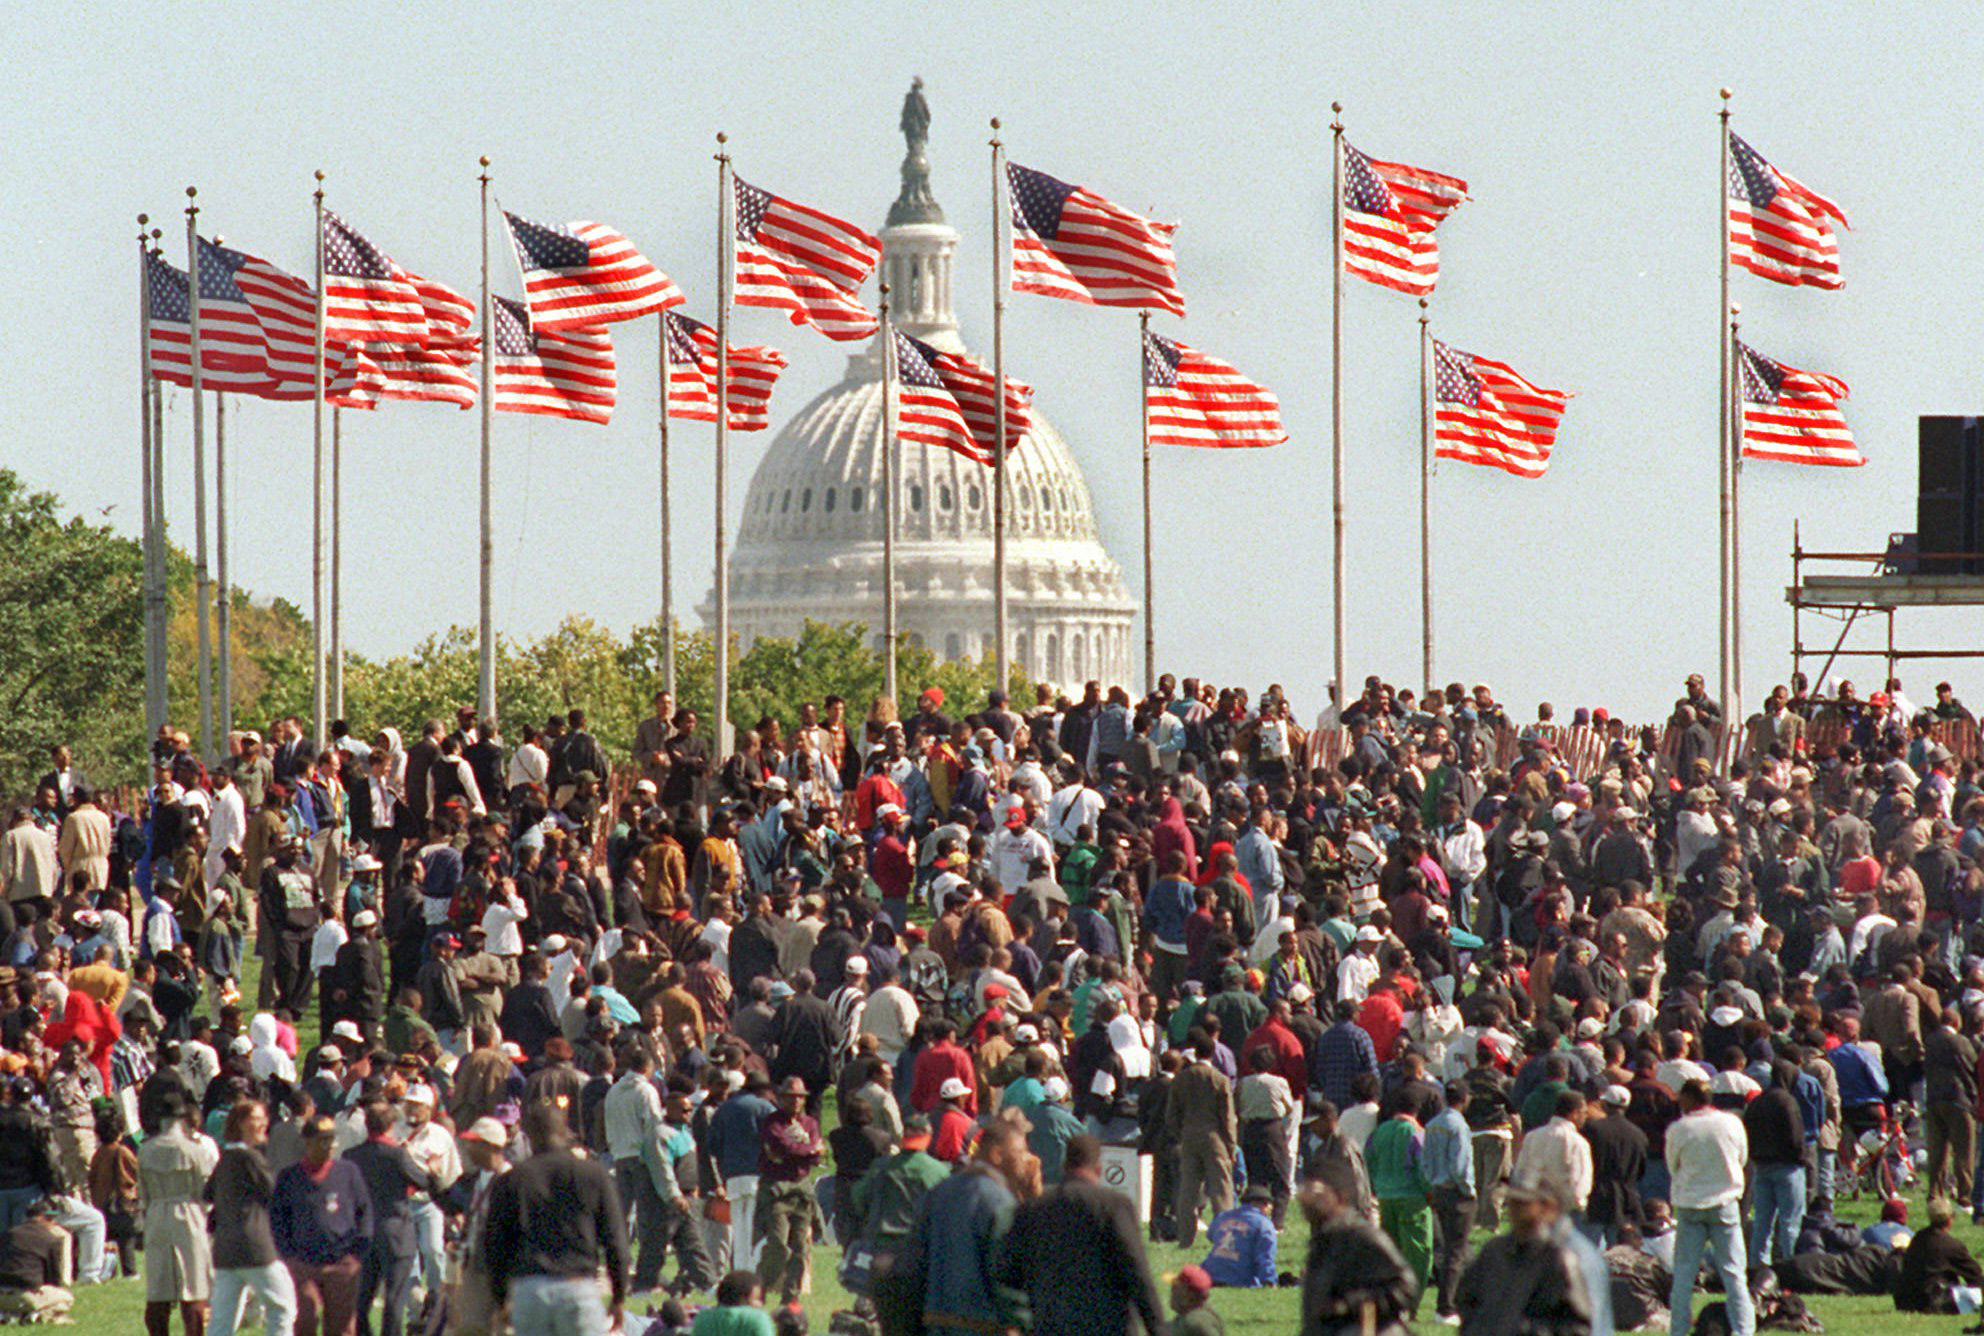 participants in the Million Man March gather on the Washington Monument grounds Monday Oct. 16, 1995. Tens of thousands of black men from across America gathered at the base of the Capitol, and the Mall, in a rally of unity, self-affirmation and protest.